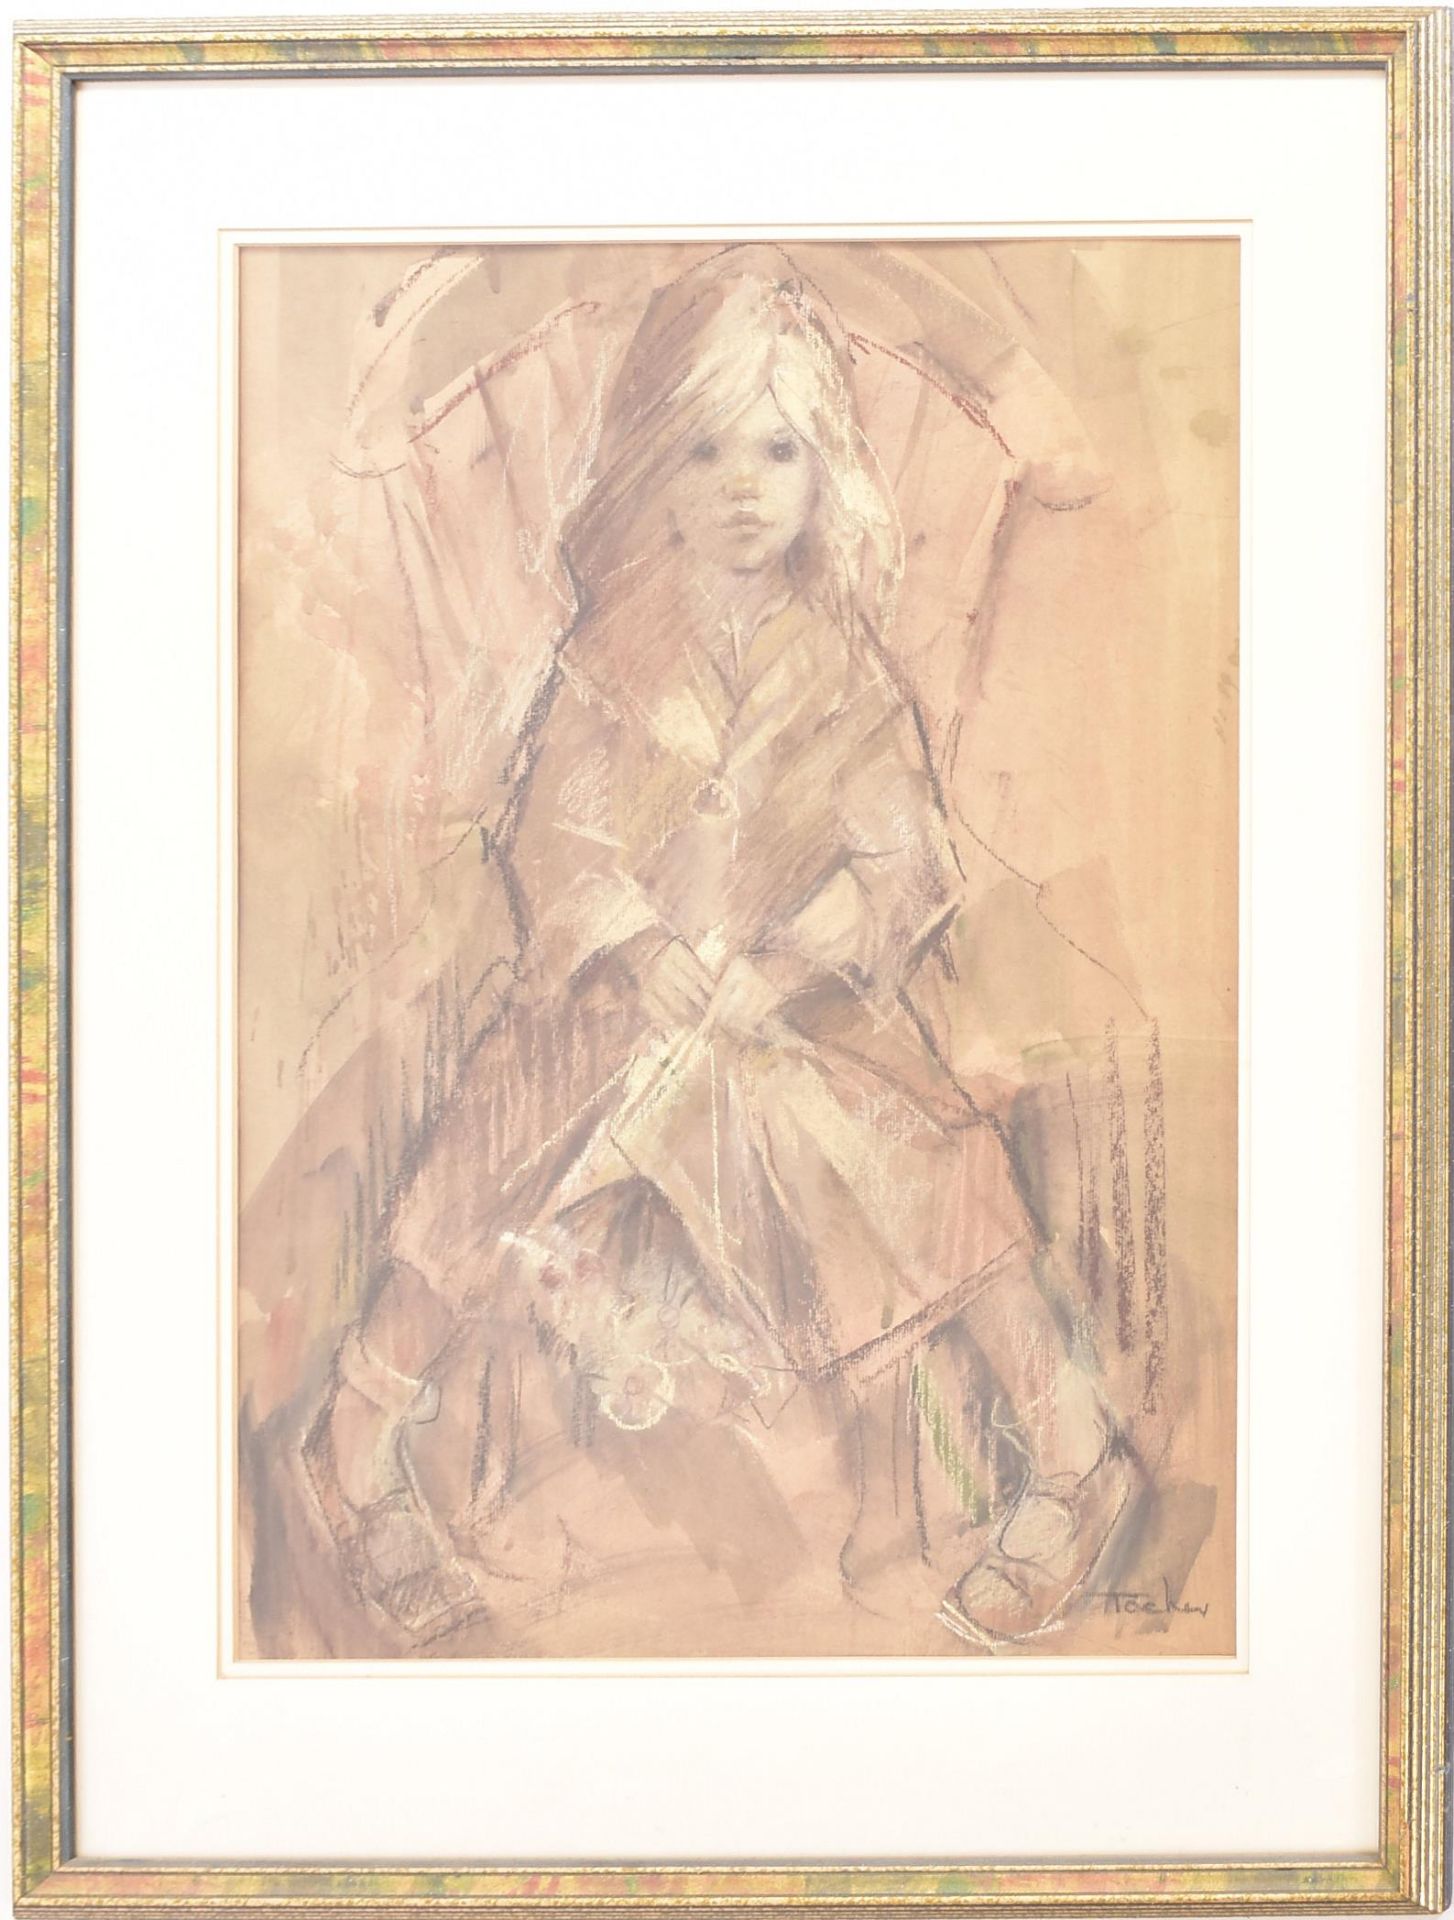 YVONNE TOCHER (1920-2013) - UNTITLED PORTRAIT - Image 2 of 4